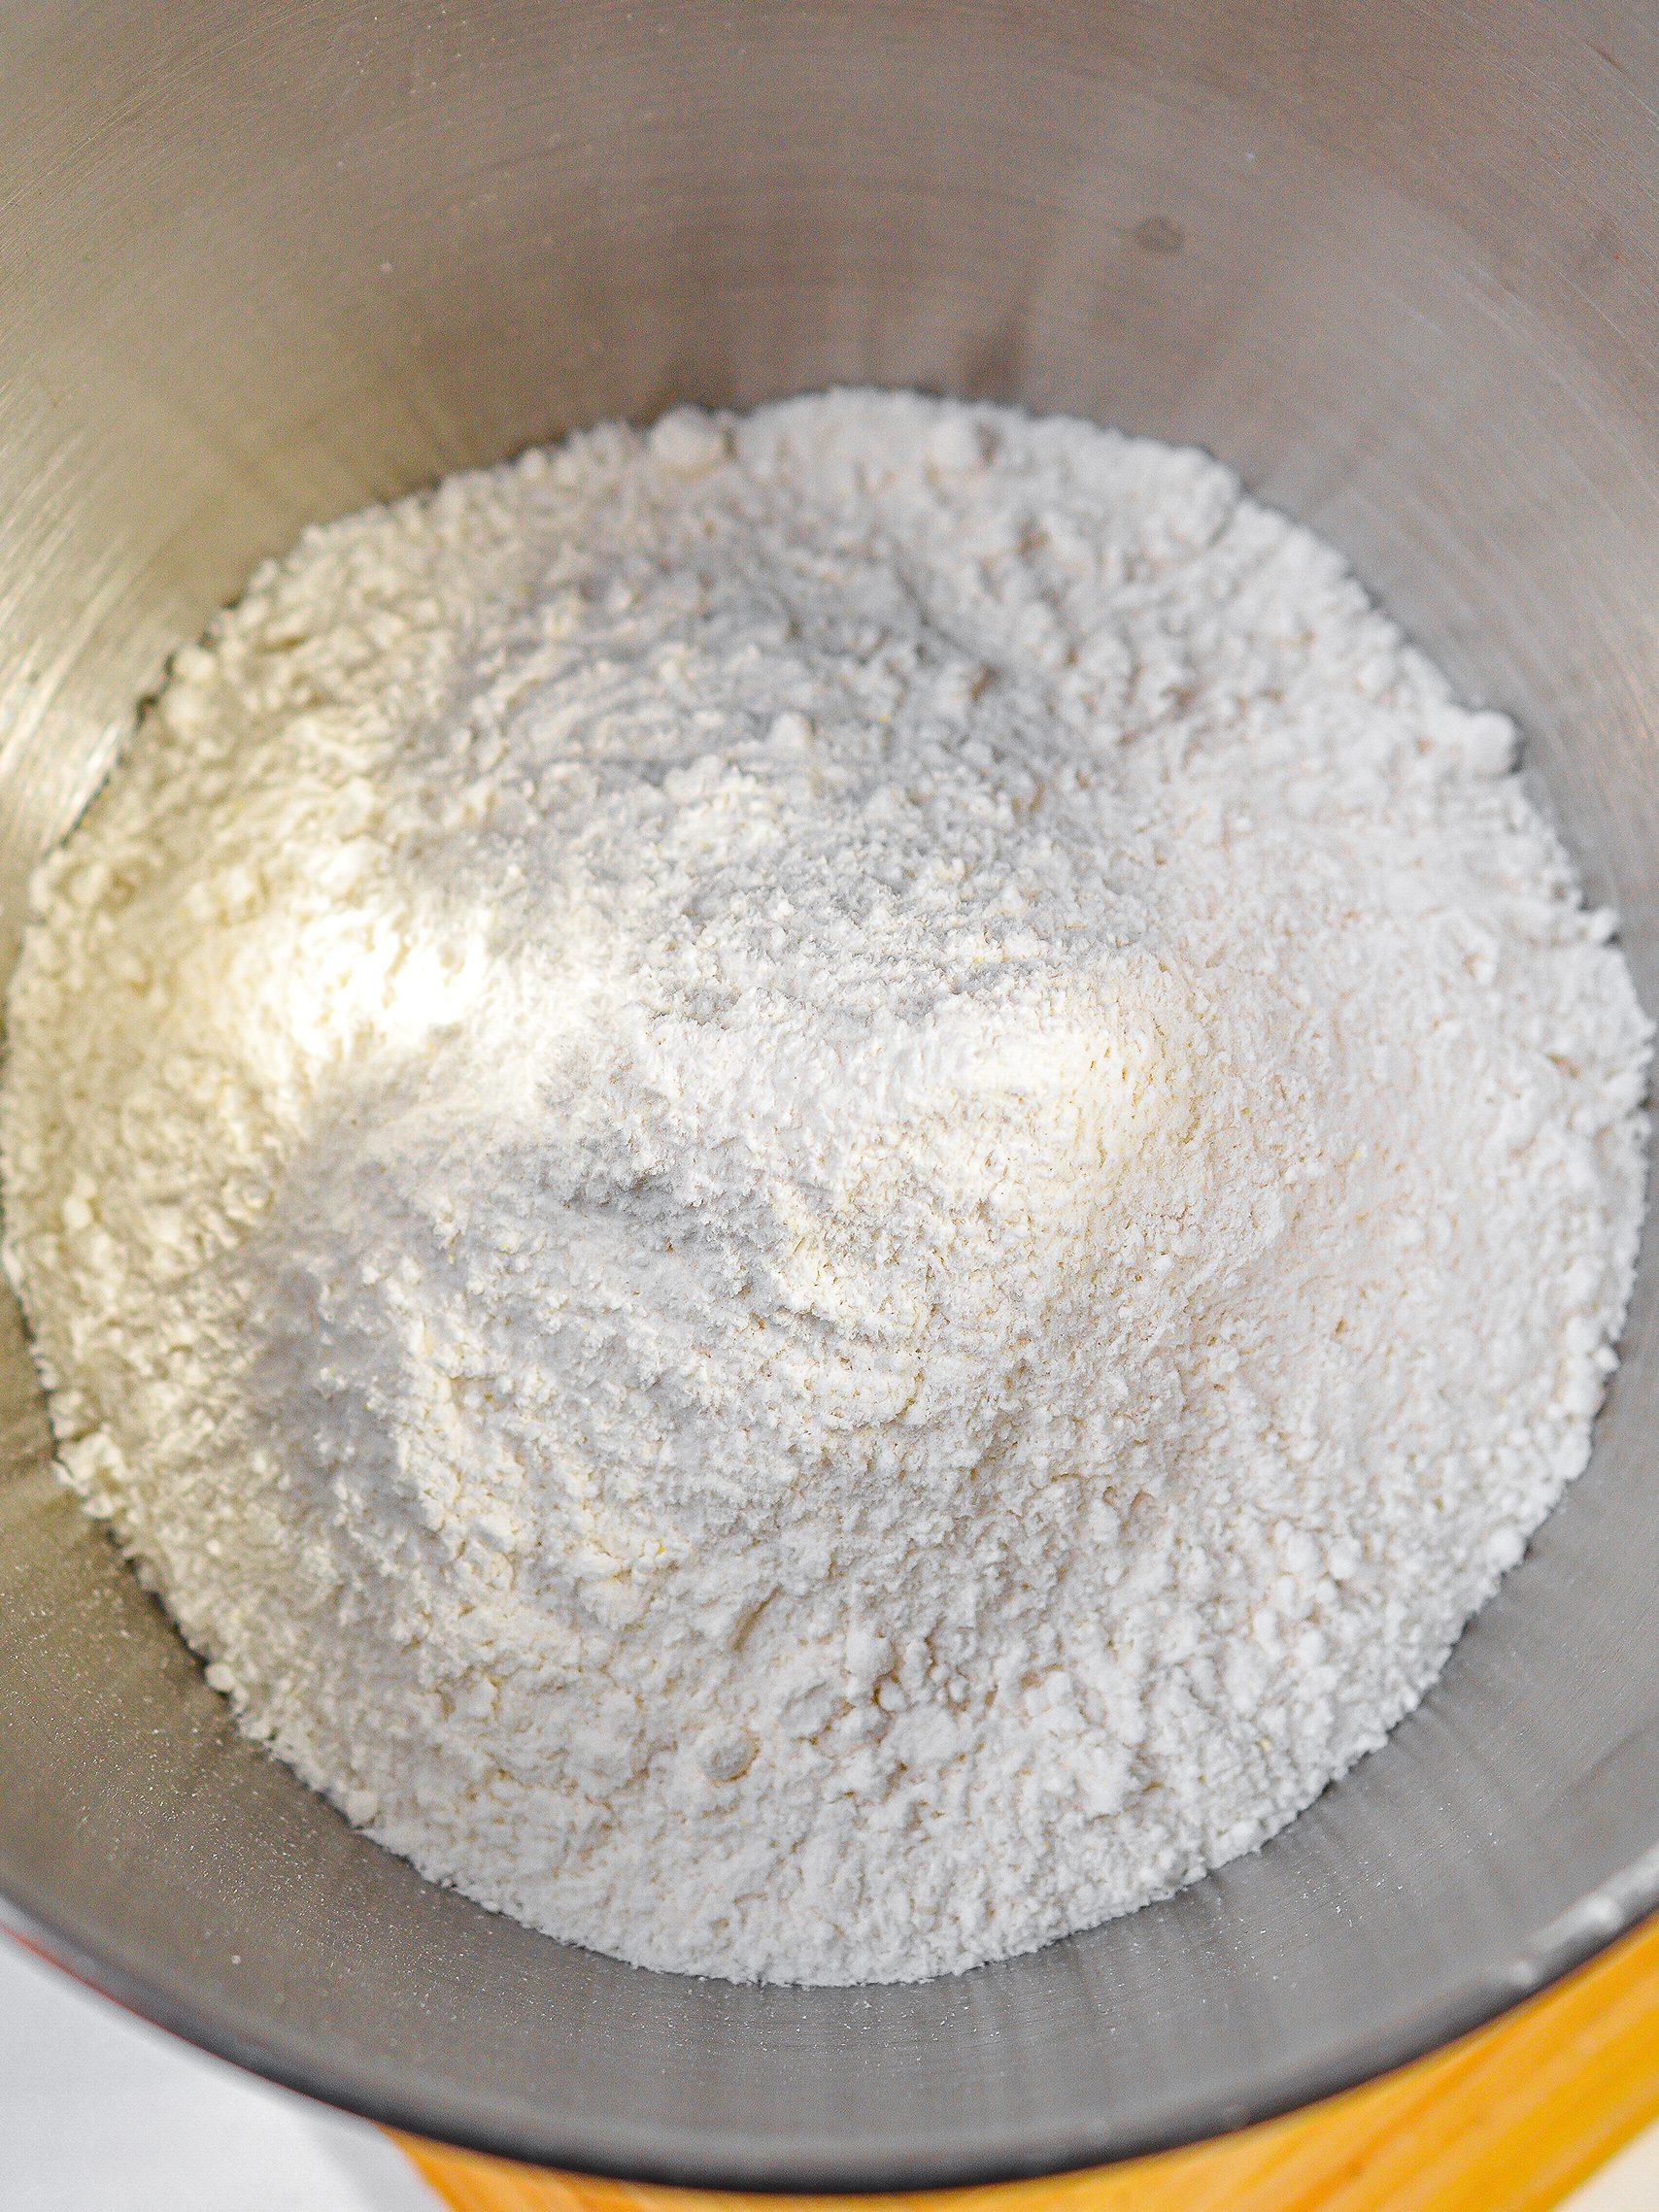 Add the white cake mix to a mixing bowl.